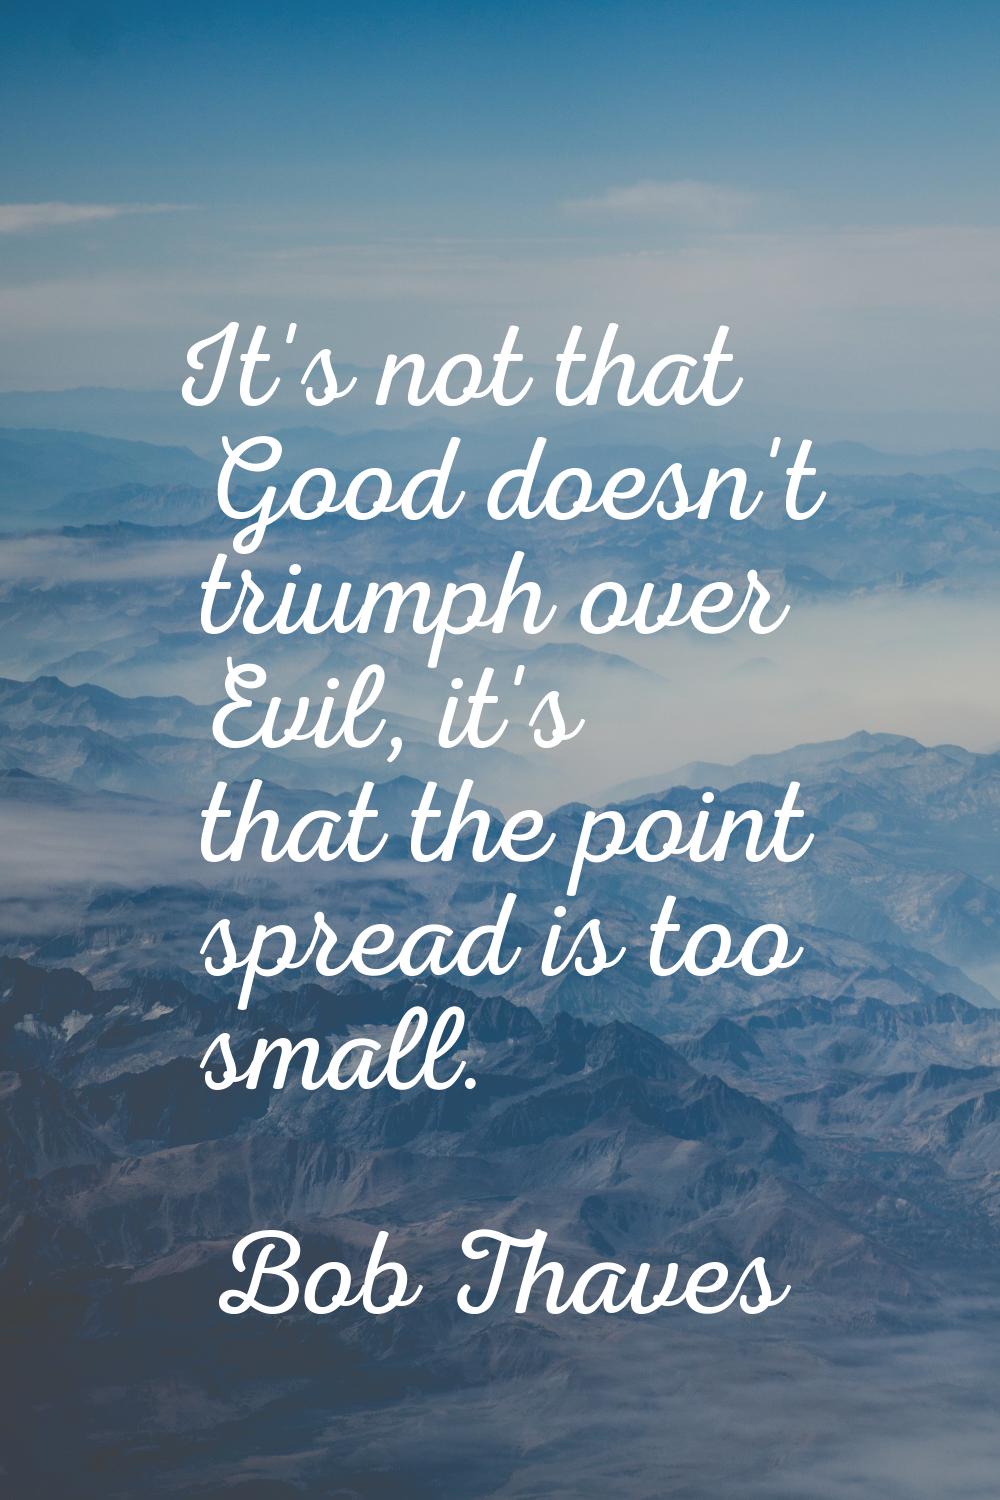 It's not that Good doesn't triumph over Evil, it's that the point spread is too small.